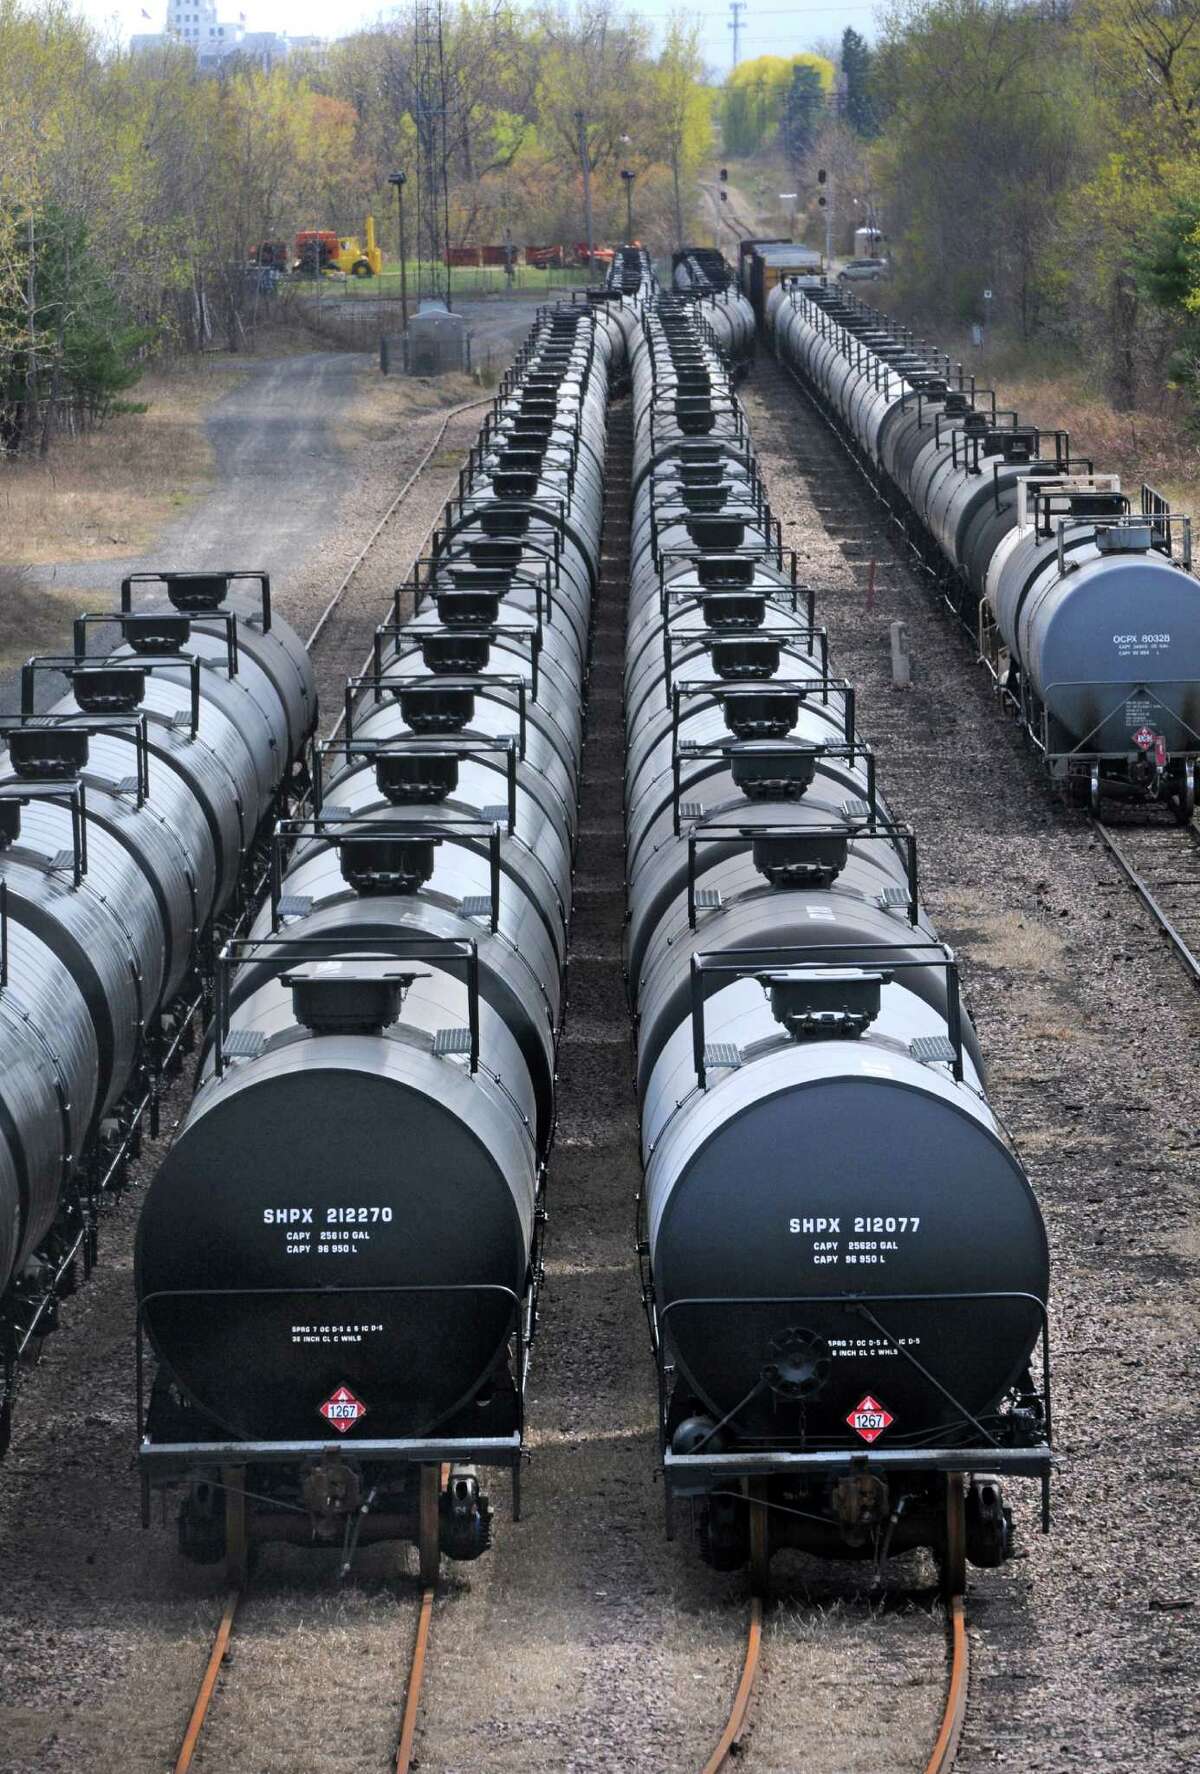 Oil train cars seen from the Route 155 bridge on Thursday April 30, 2015 in Watervliet, N.Y. (Michael P. Farrell/Times Union)